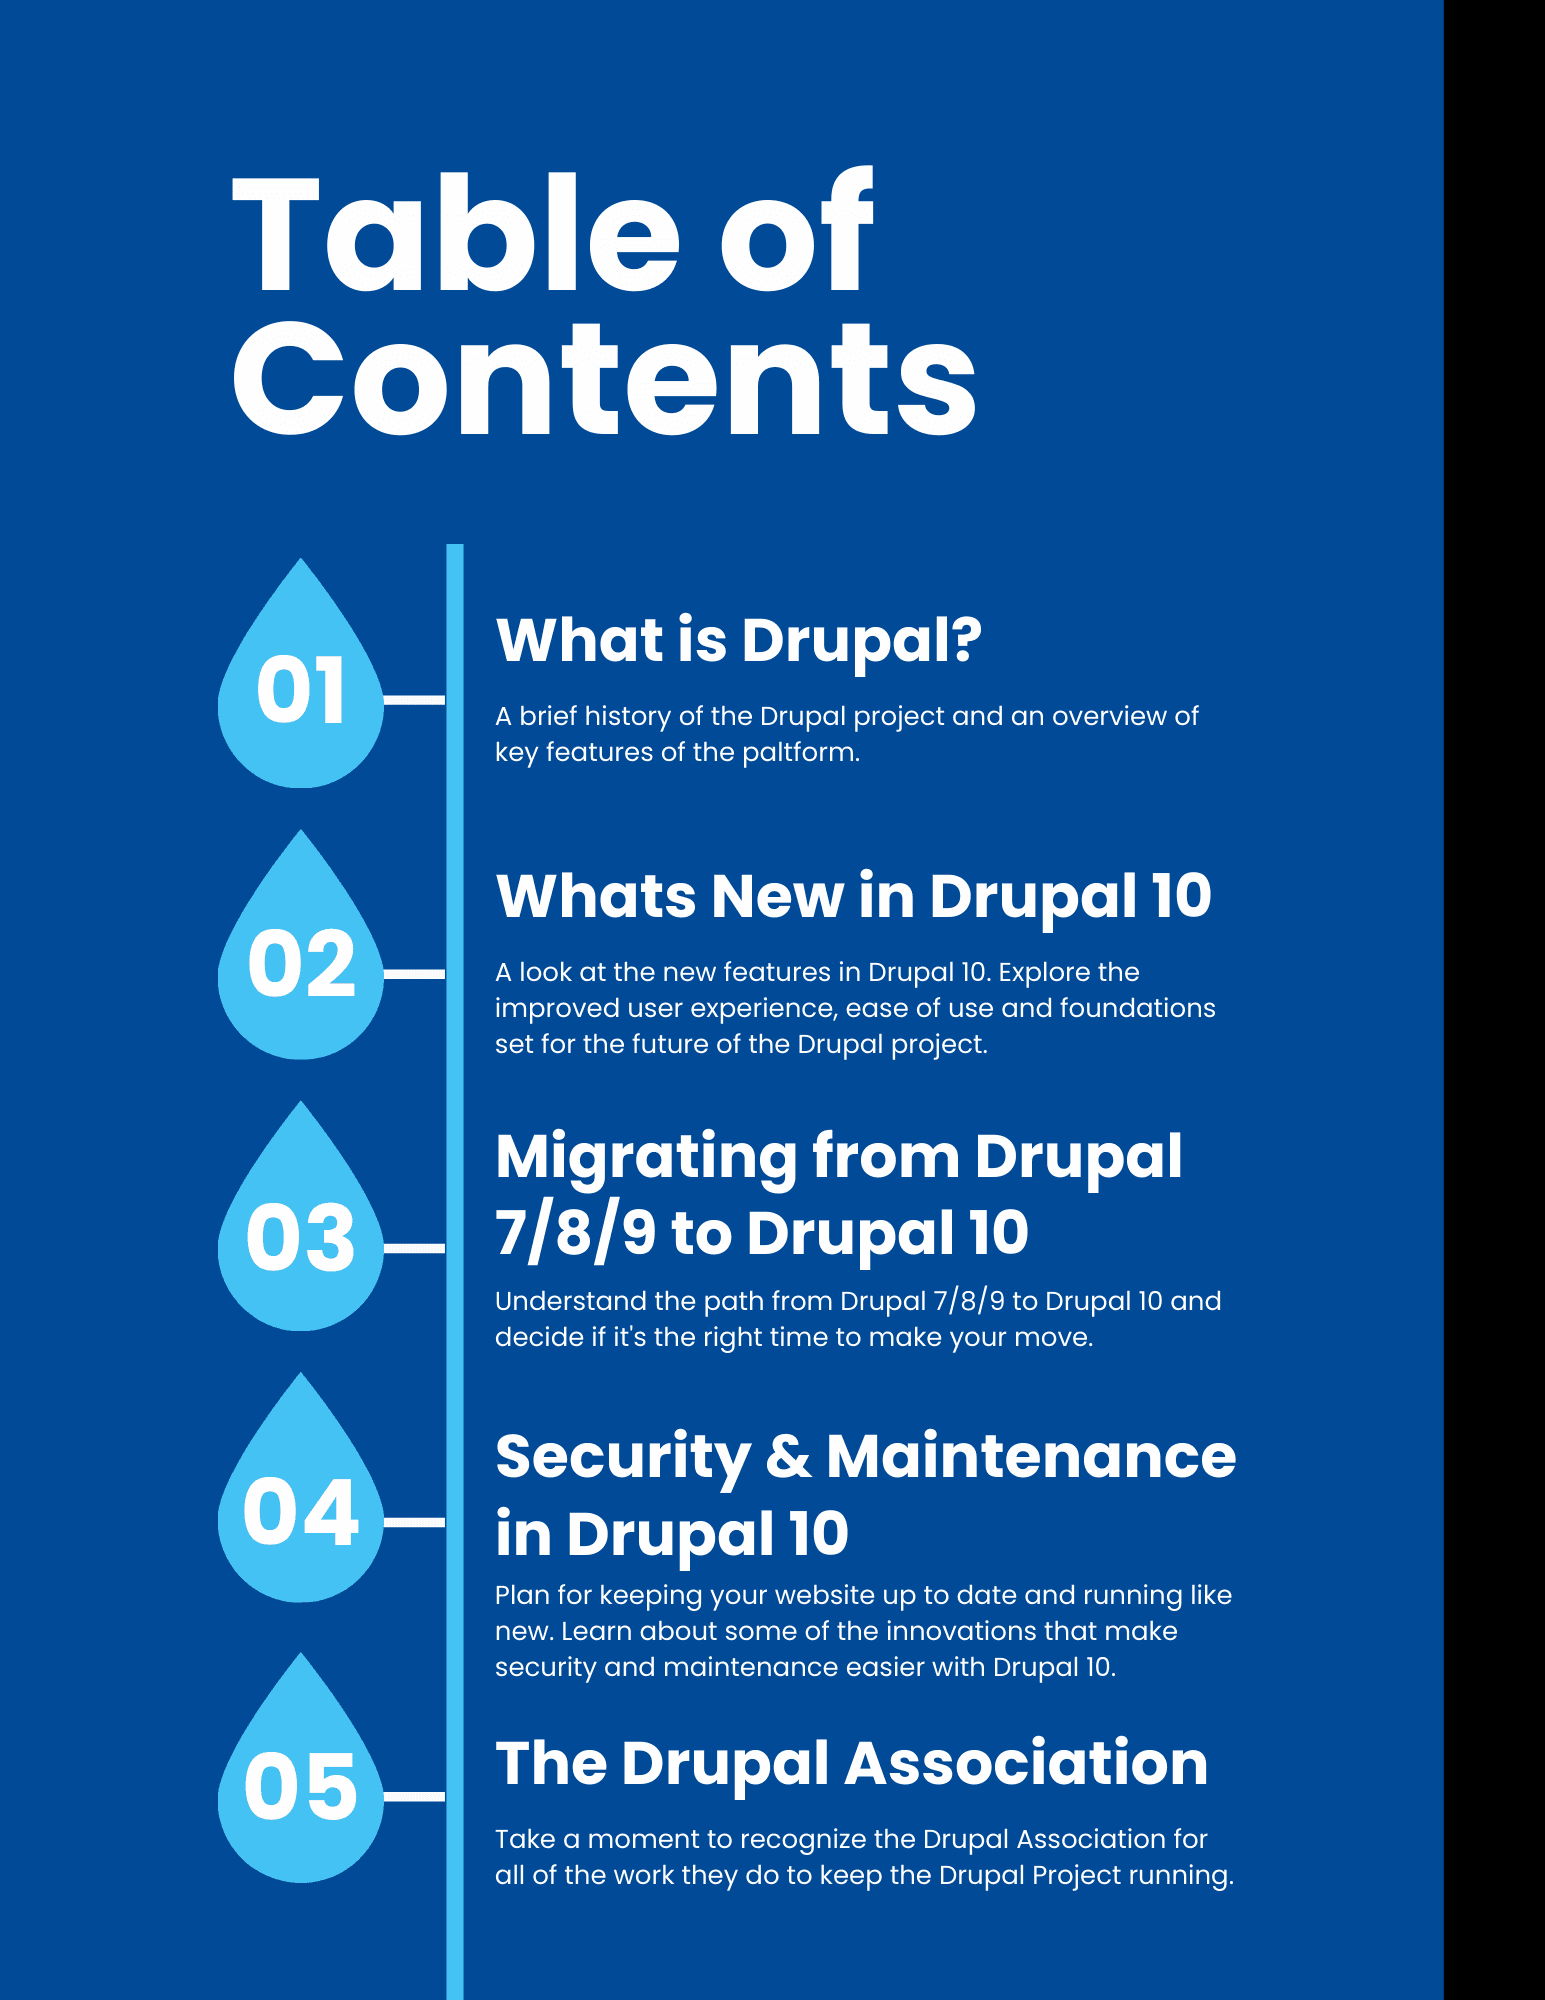 Table of Contents for The Ultimate Guide to Drupal 10 by Digital Polygon